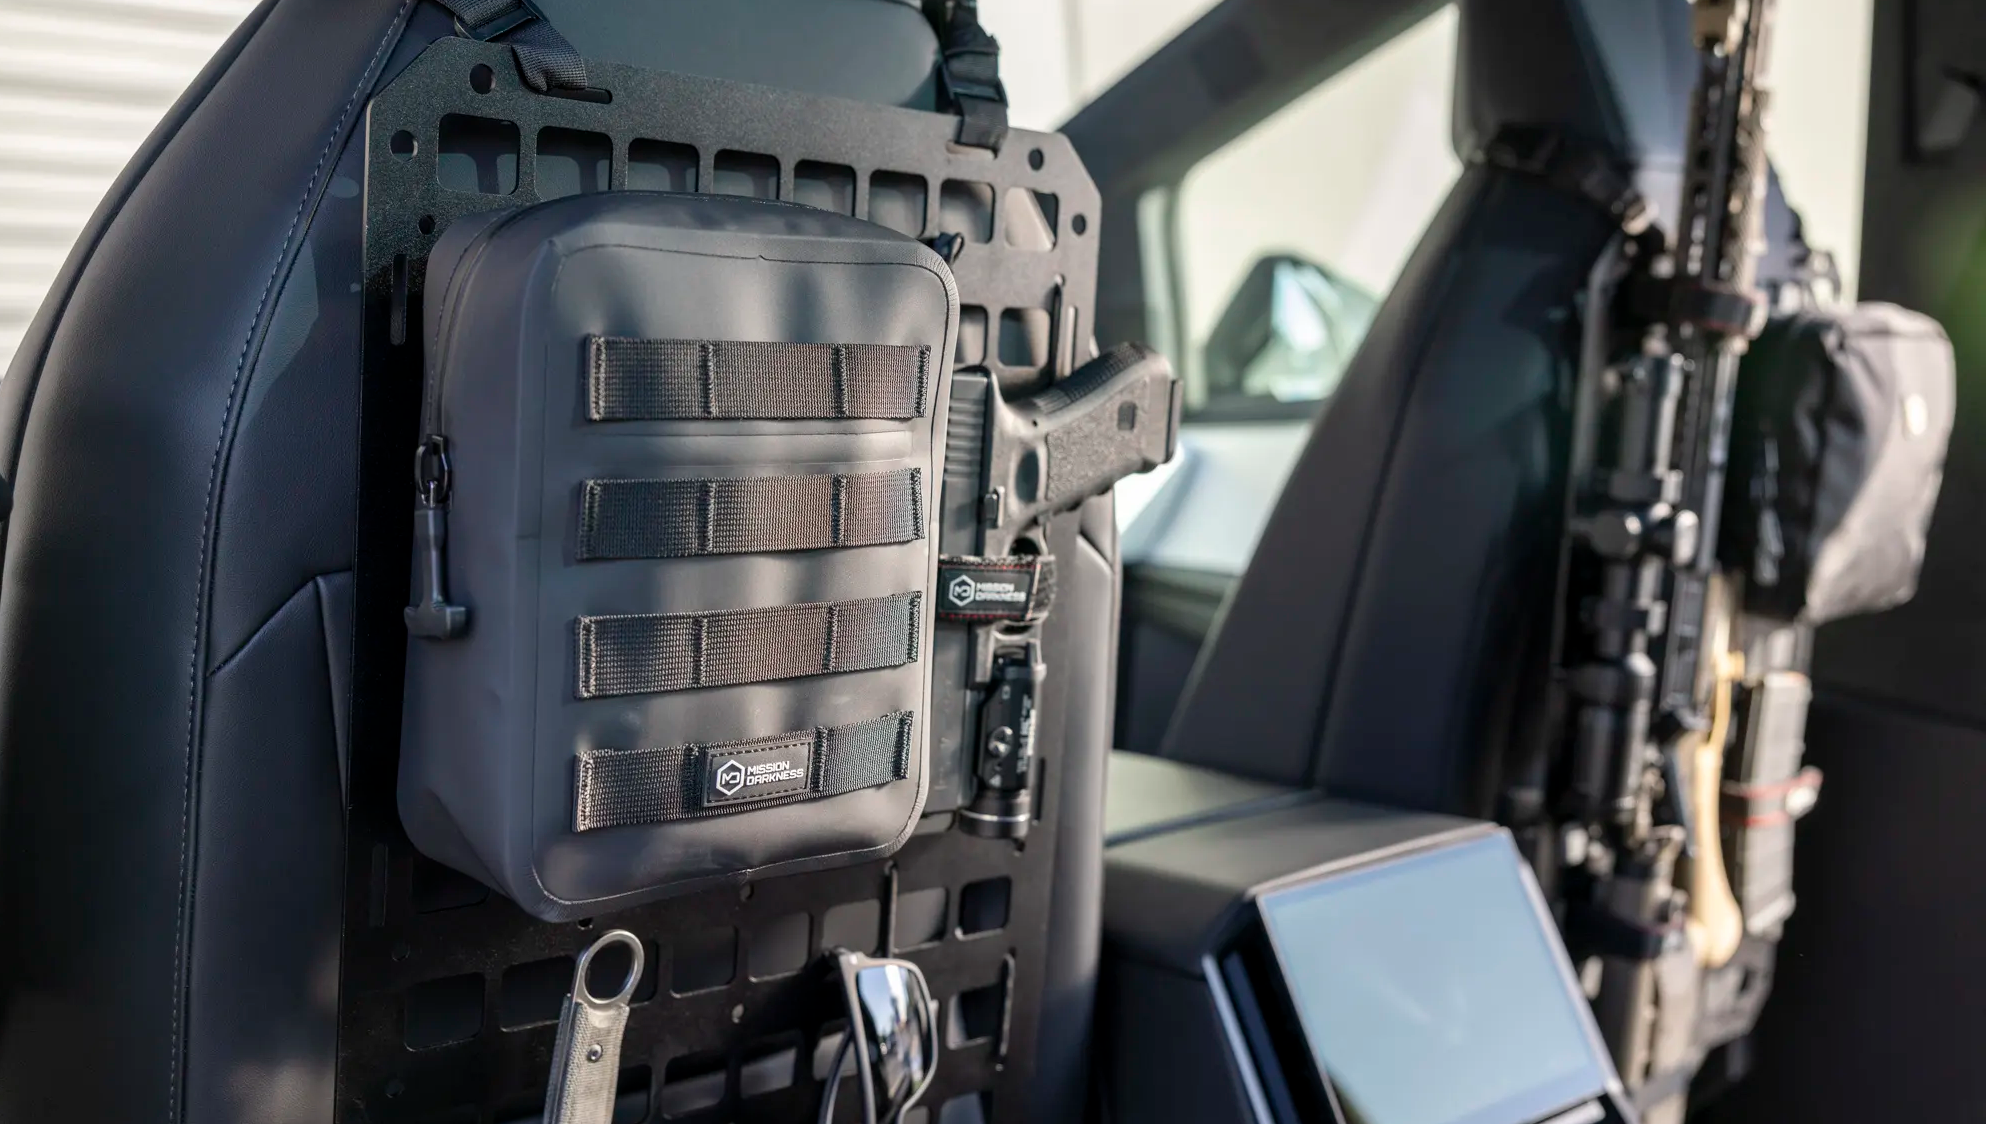 Mission Darkness Dry Shield MOLLE Faraday Pouch attached to molle panel in Tesla Cybertruck